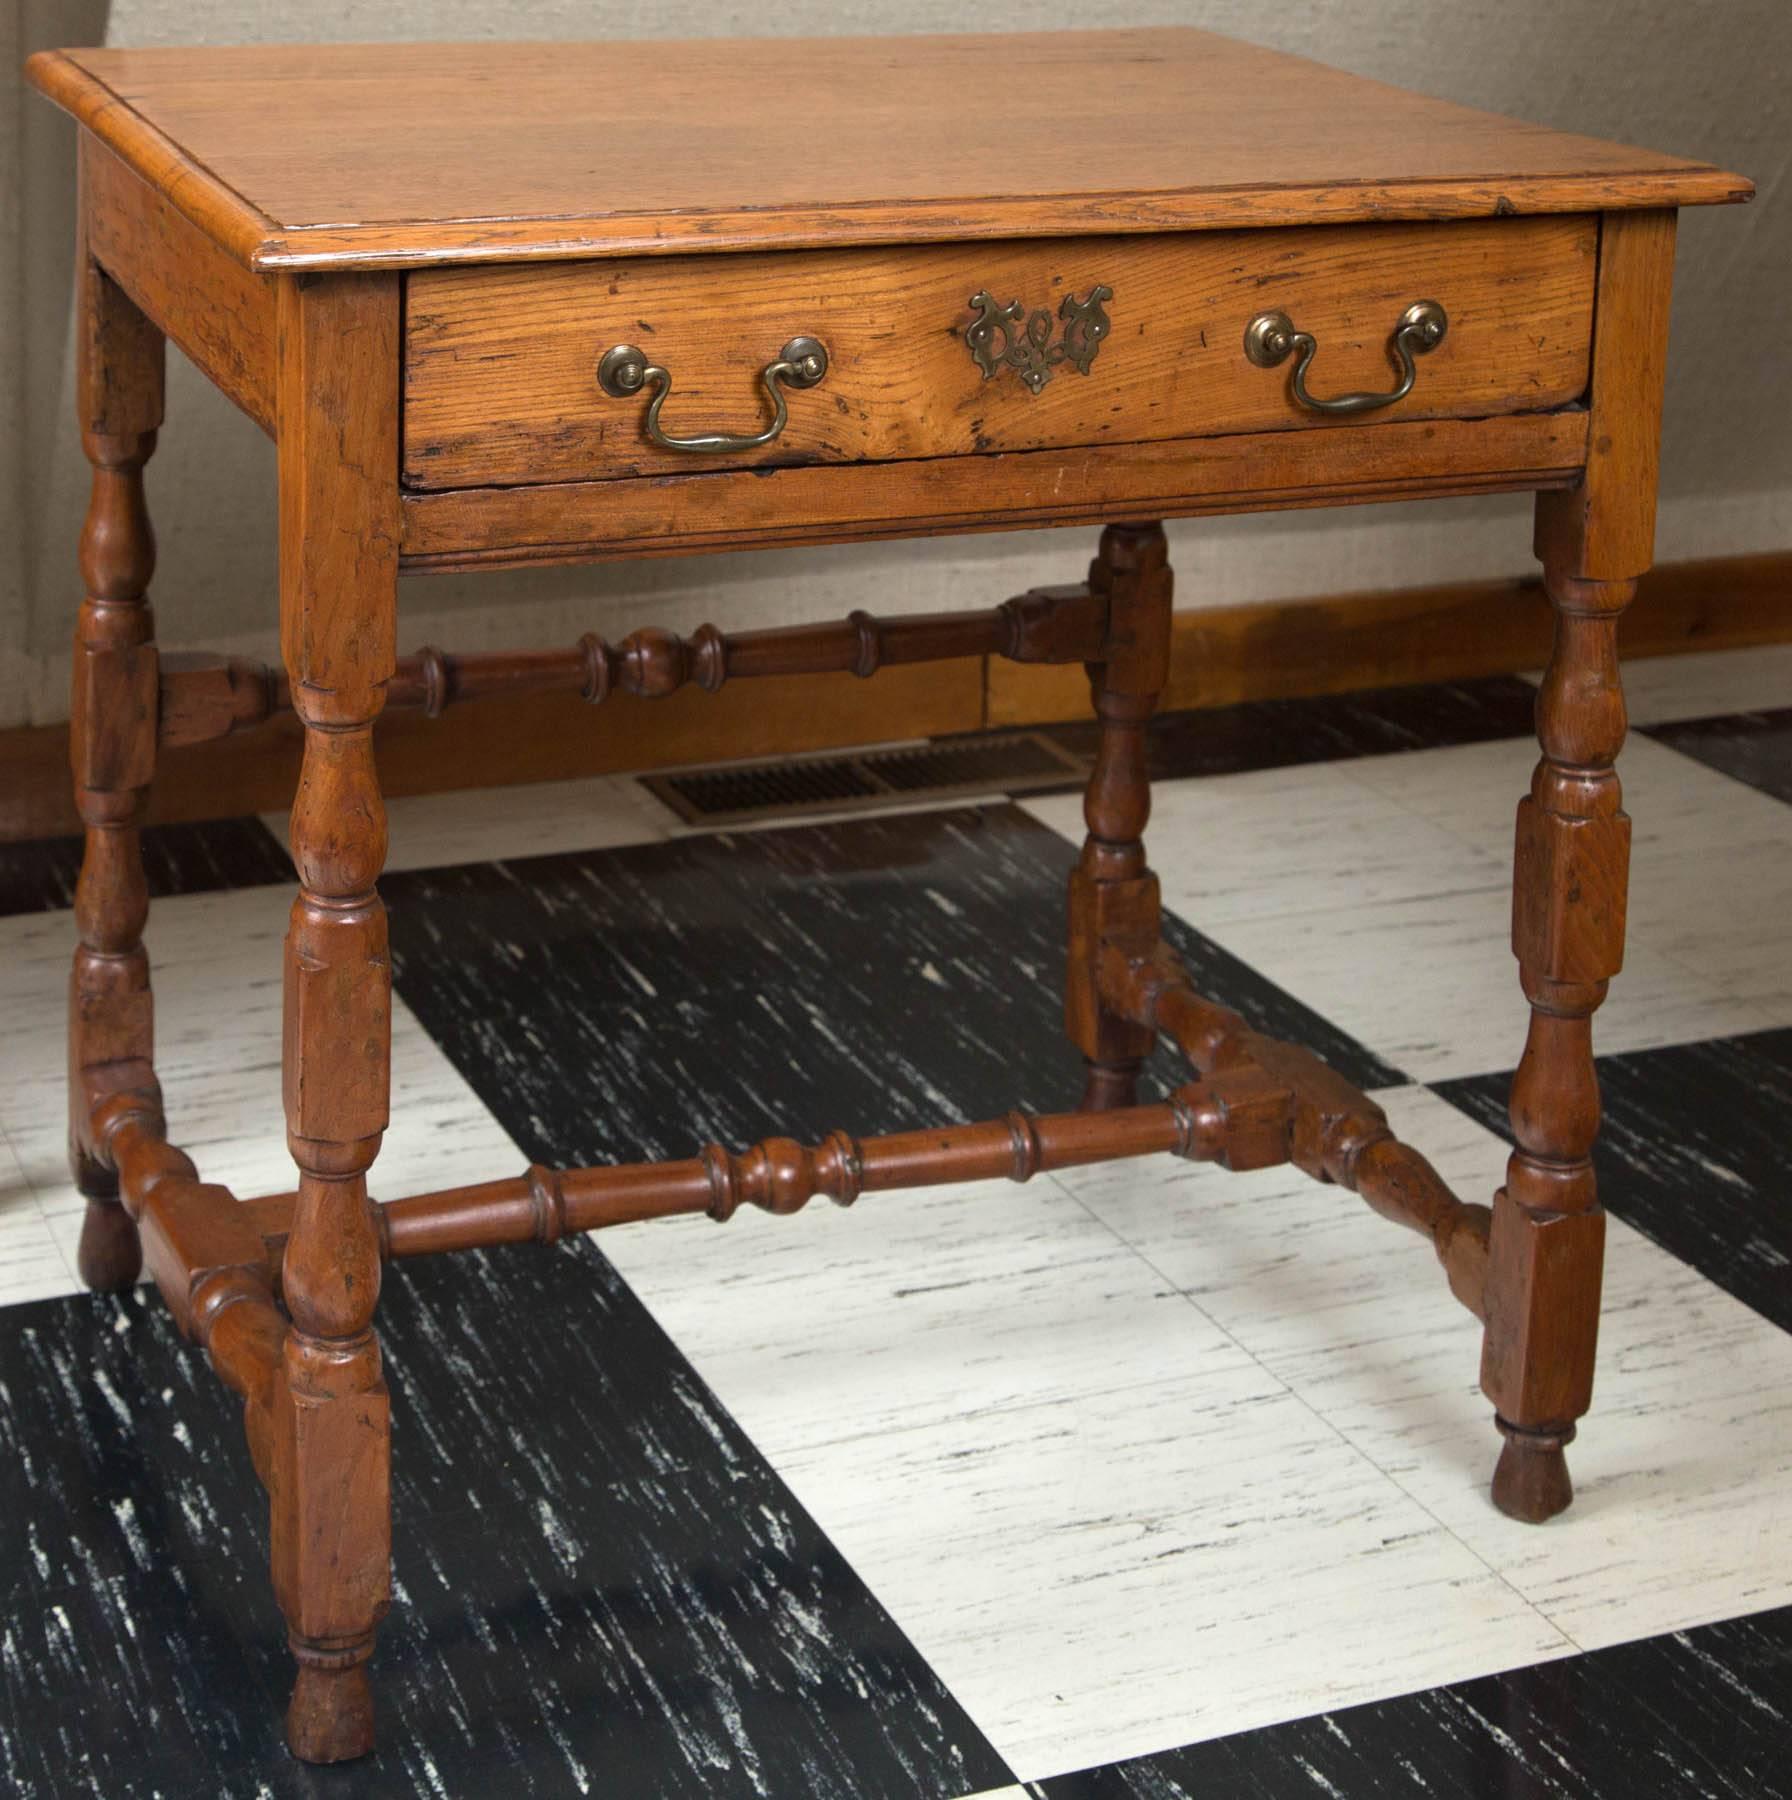 Oak tavern table with single drawer standing on turned legs and stretchers.